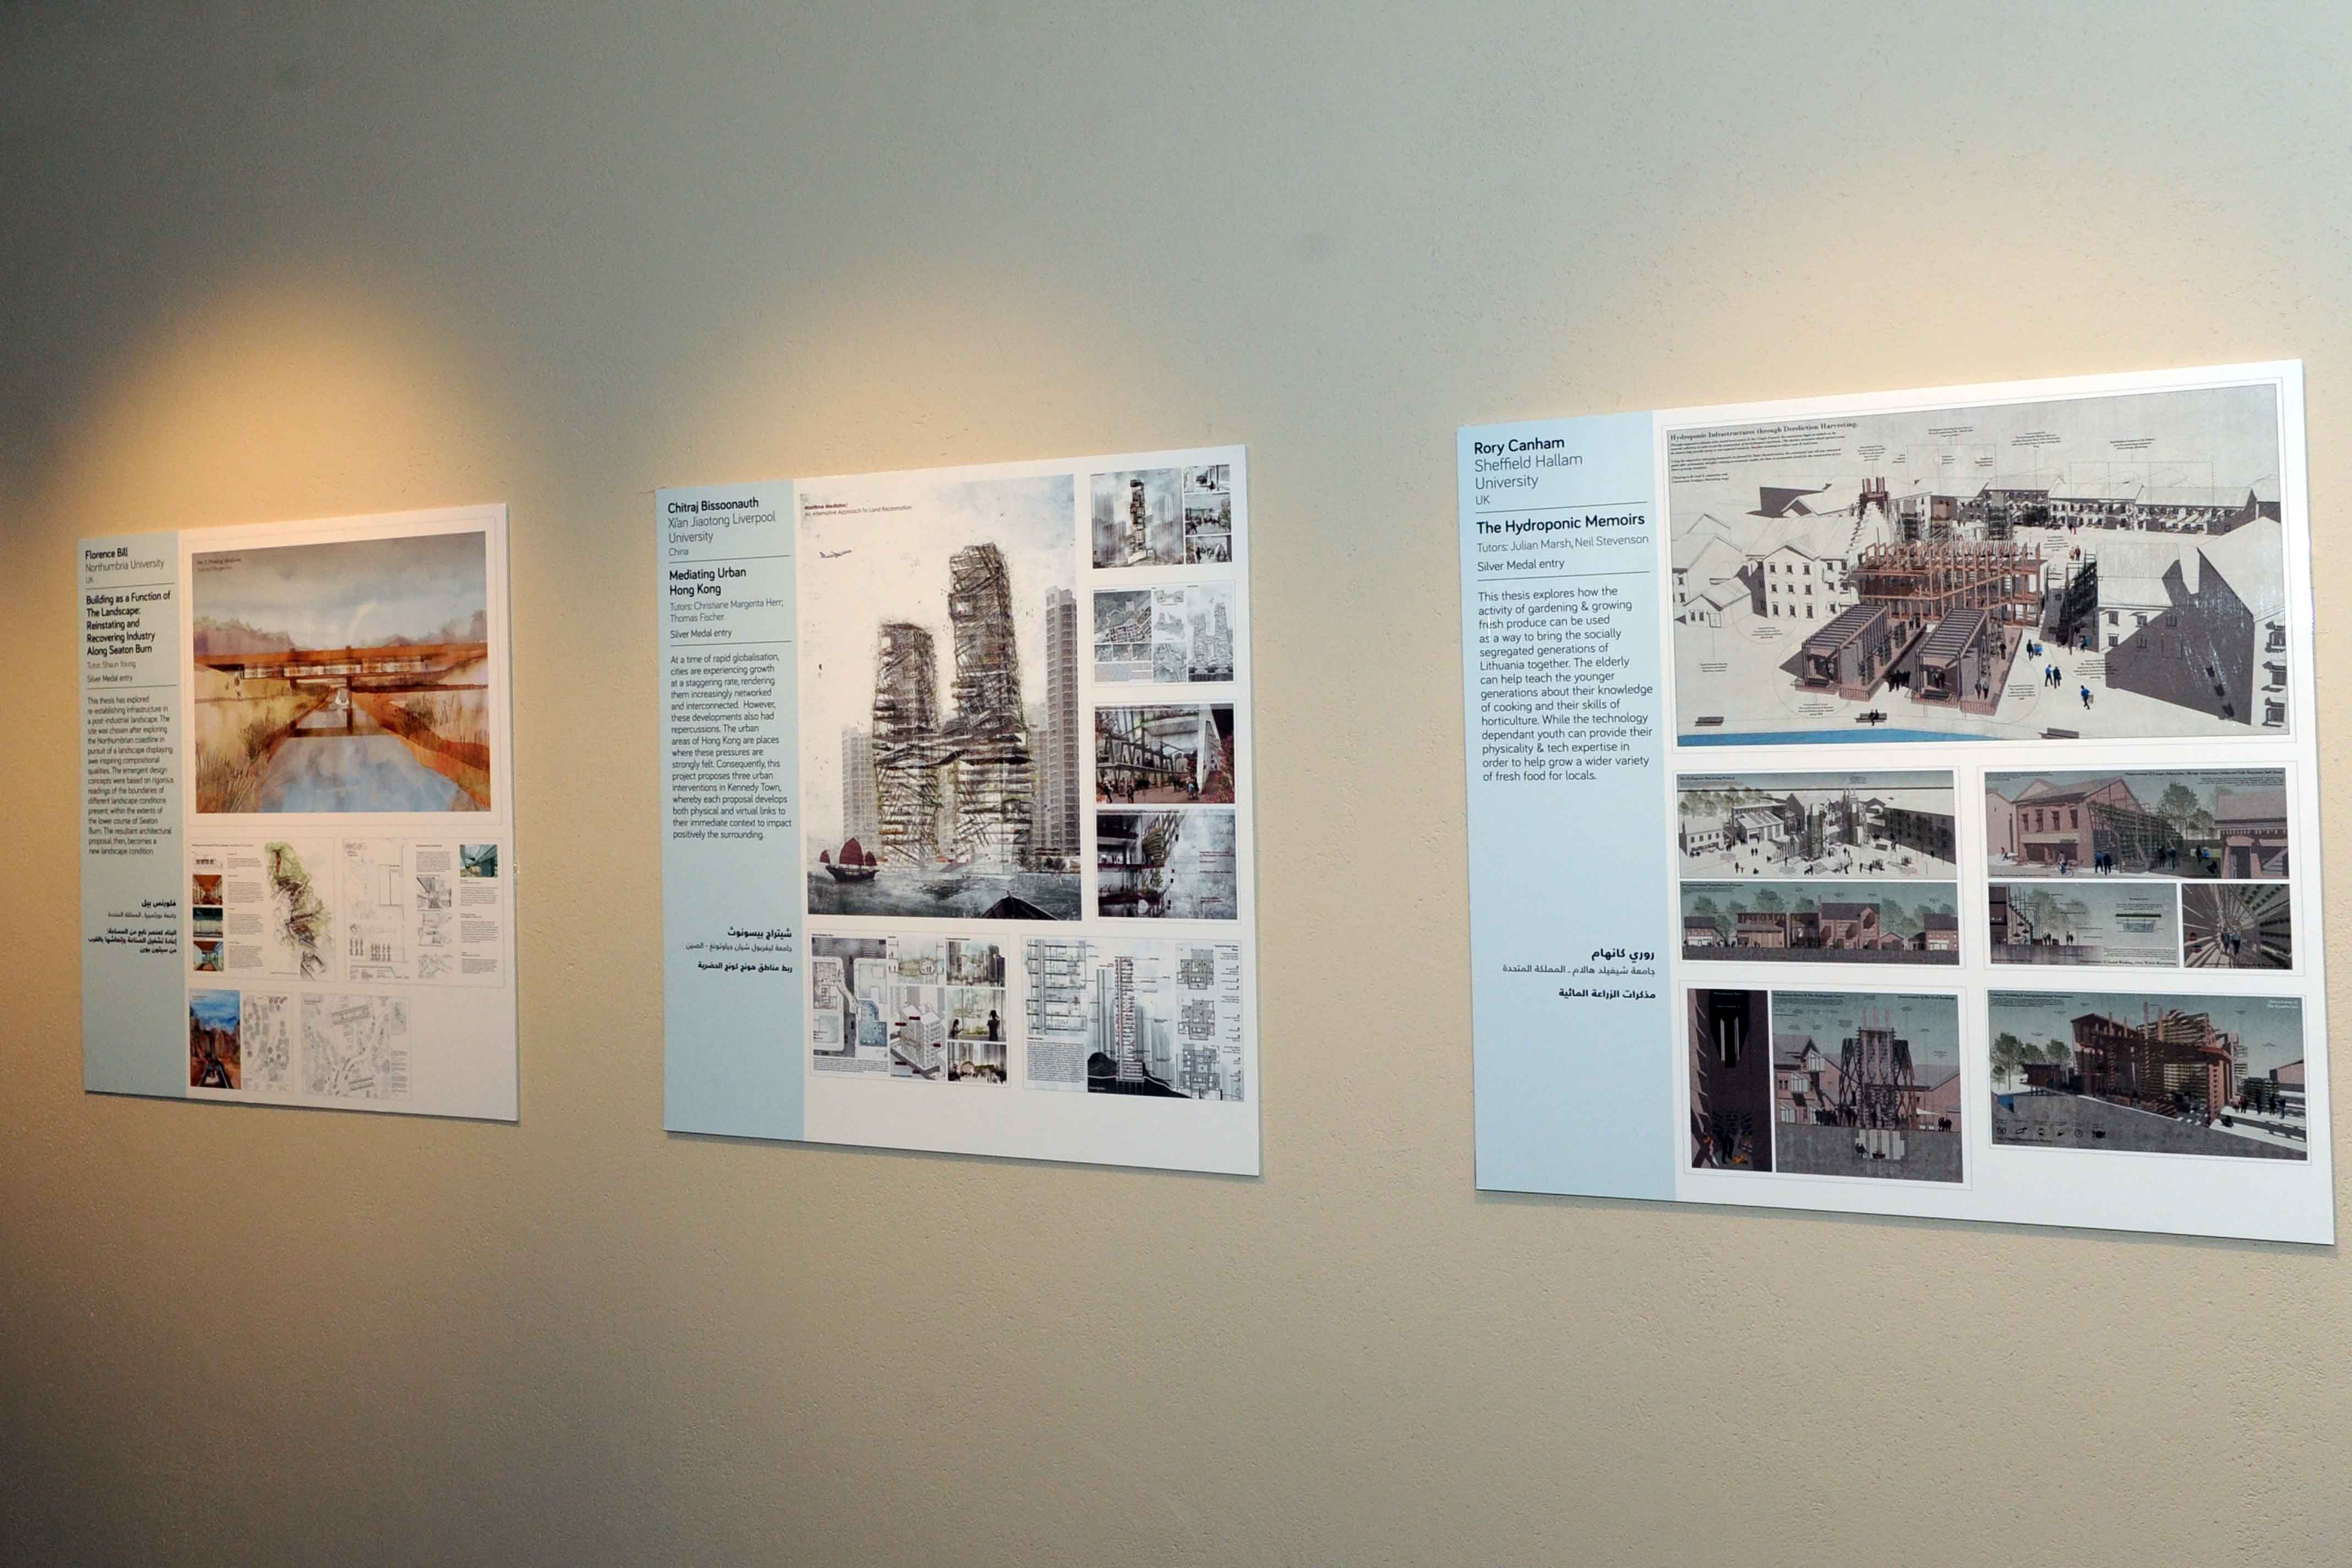 The Royal Institute of British Architects (RIBA) President's Medal Exhibition in Amricani Cultural Centre